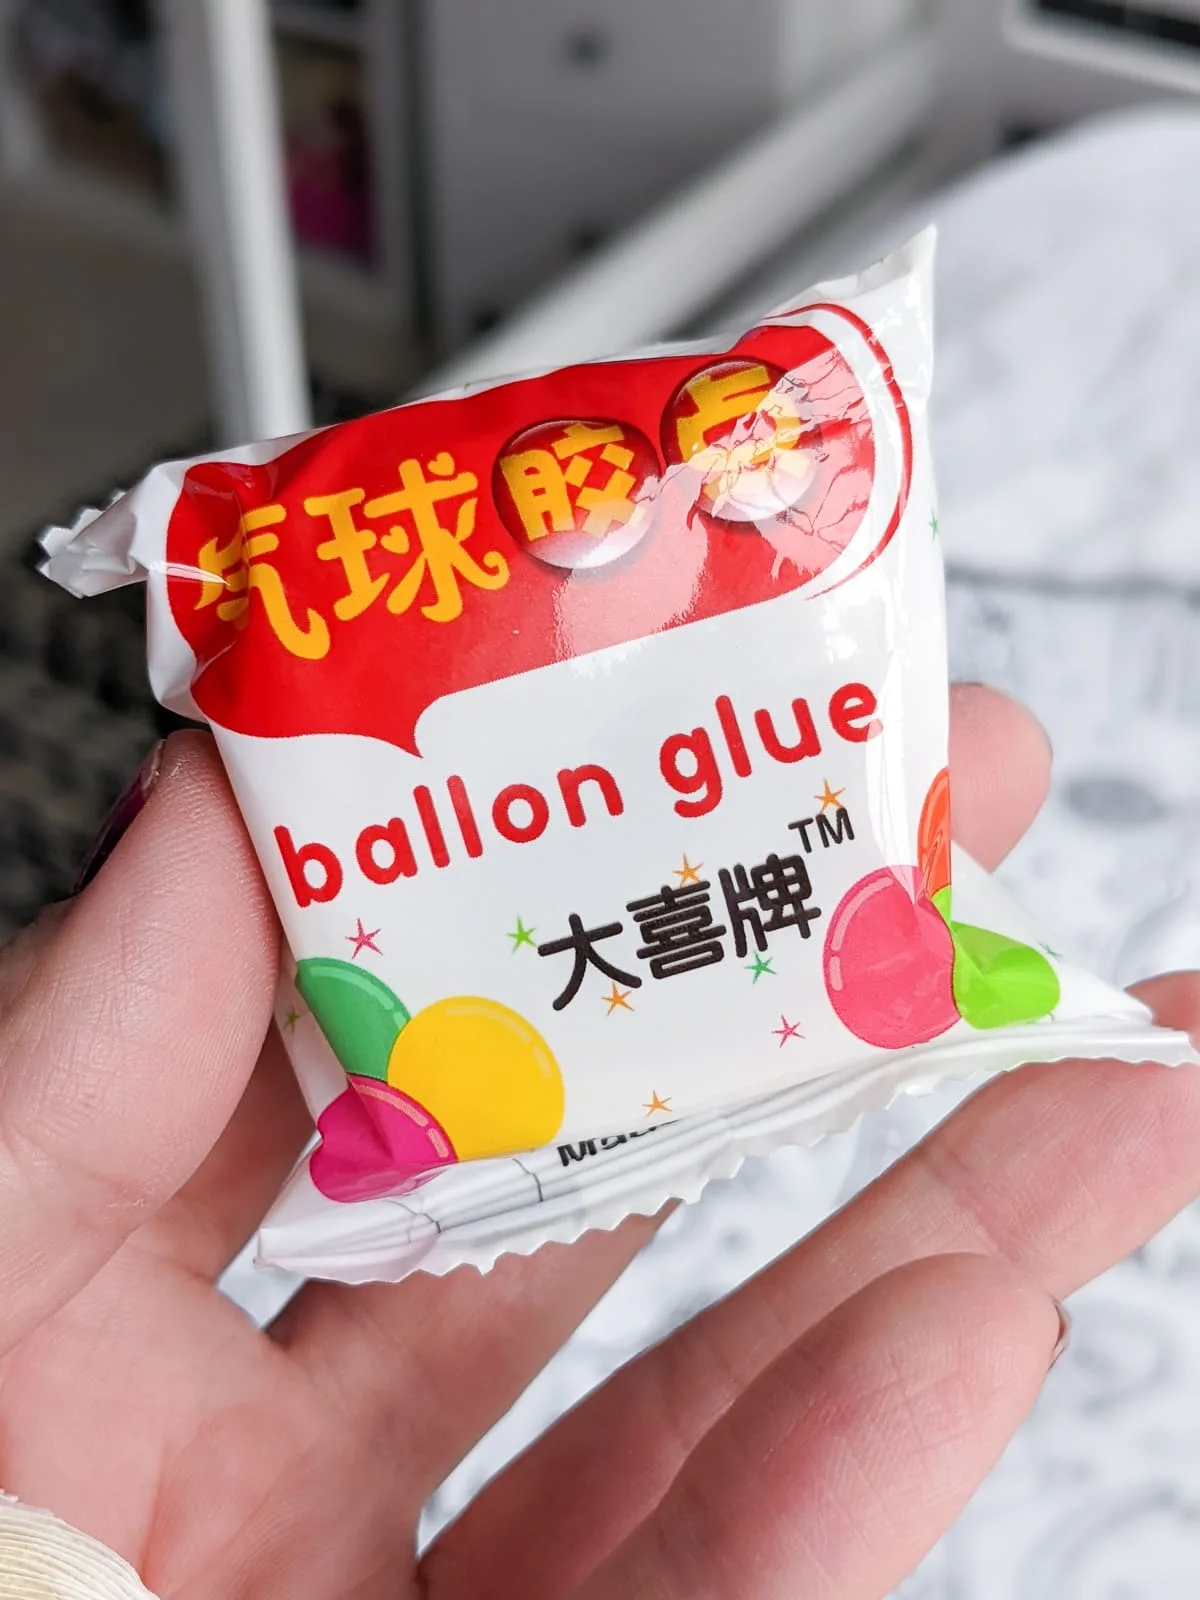 package of balloon glue